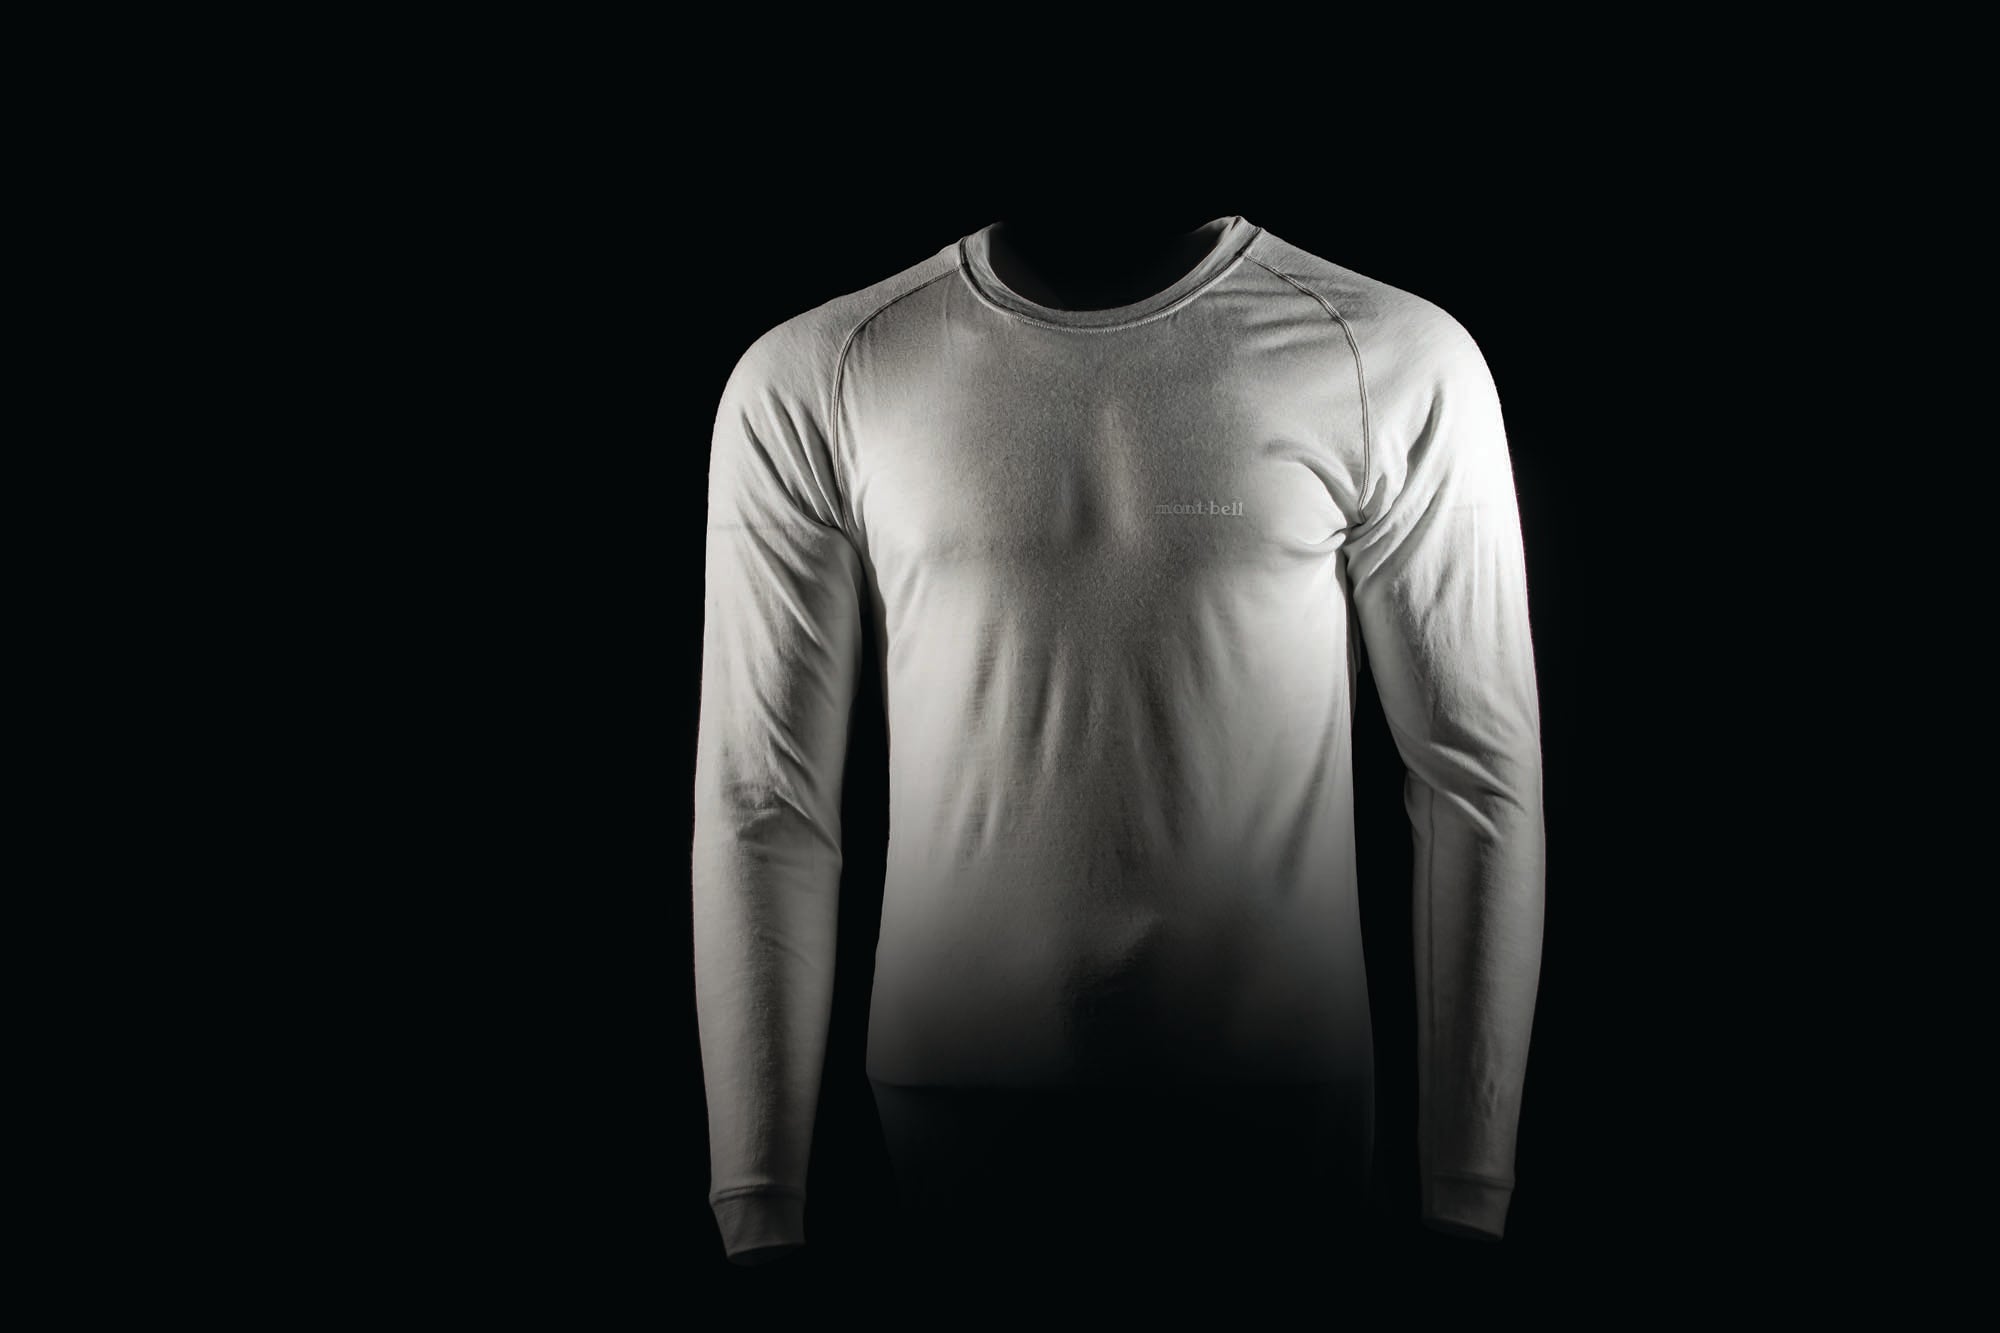 Woolx - Excellent Merino Wool Base Layer And Outdoor Apparel